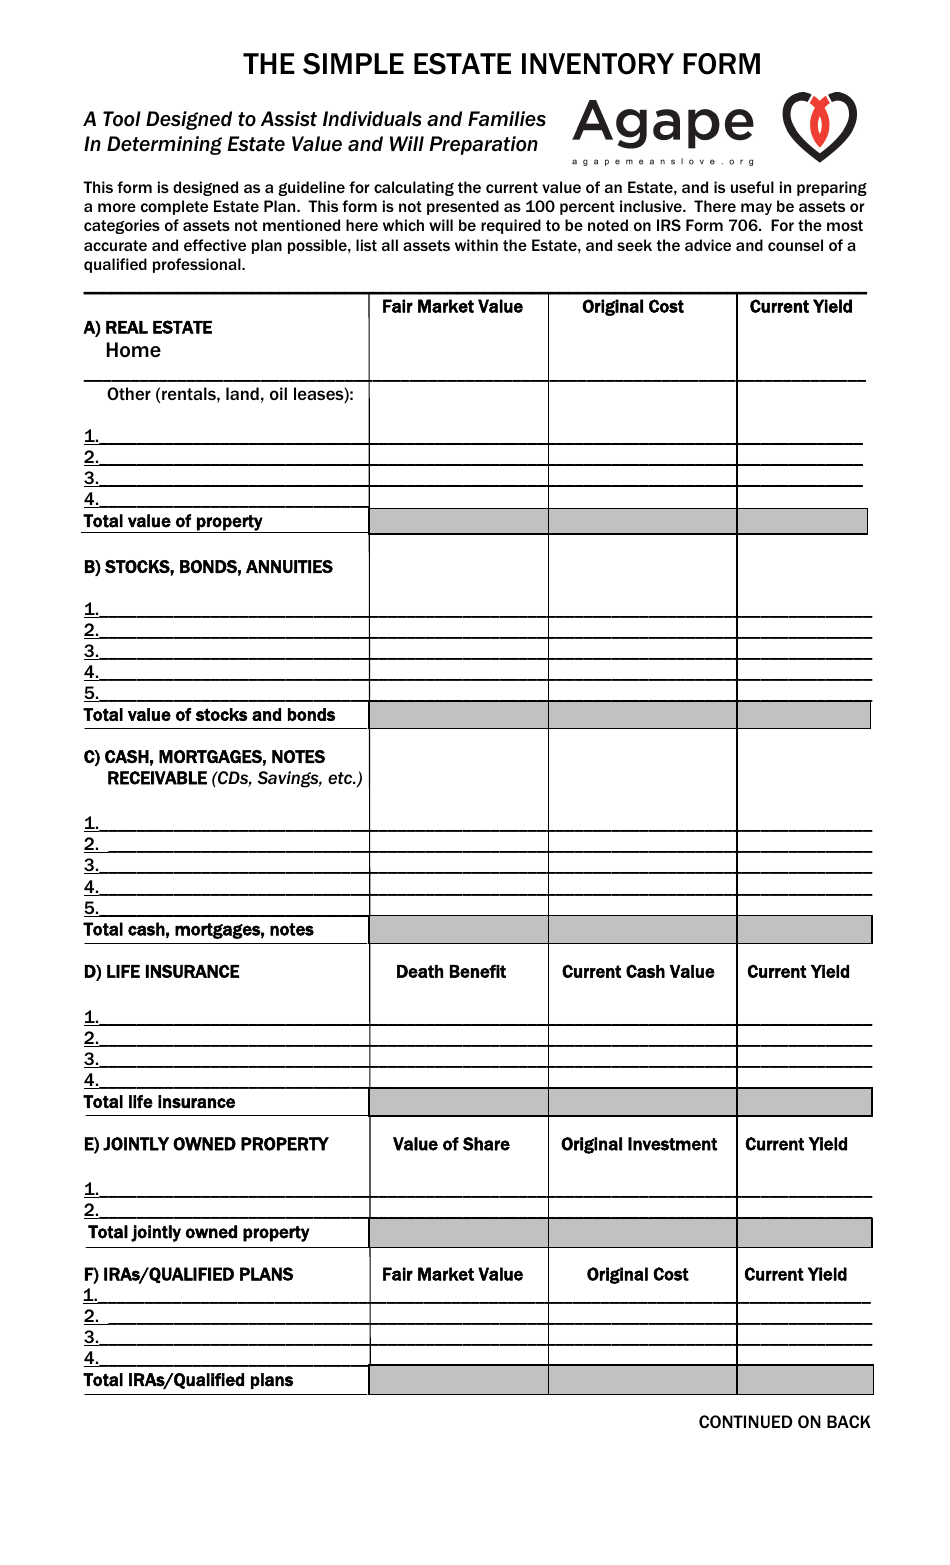 The Simple Estate Inventory Form Agape Fill Out, Sign Online and